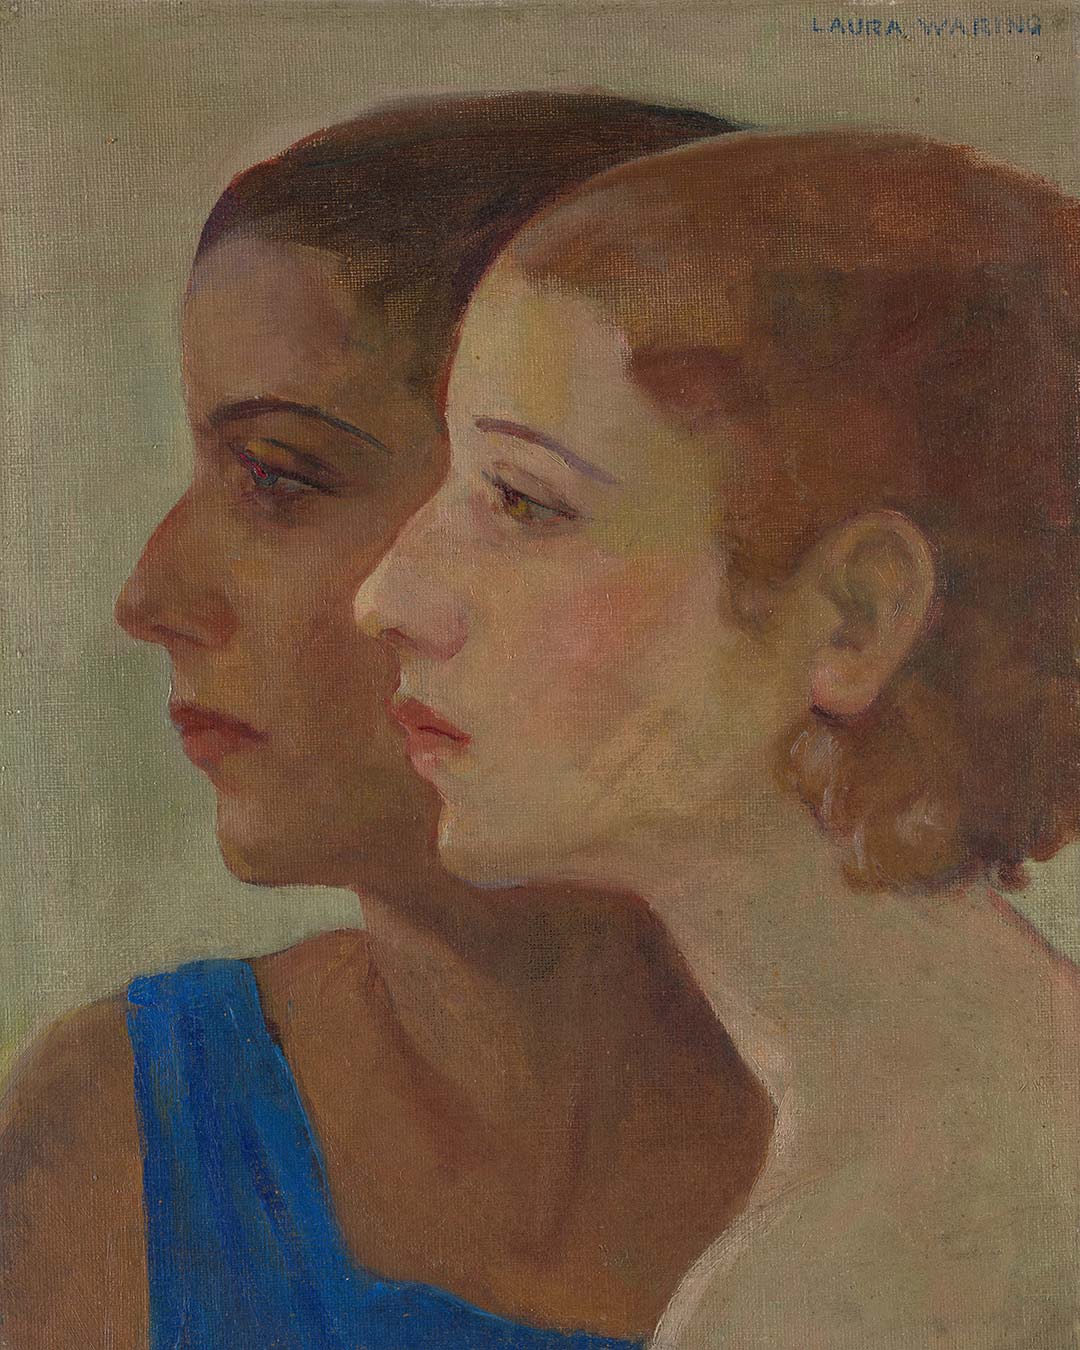 Mother and Daughter by Laura Wheeler Waring, part of Harlem Renaissance exhibition at The Metropolitan Museum